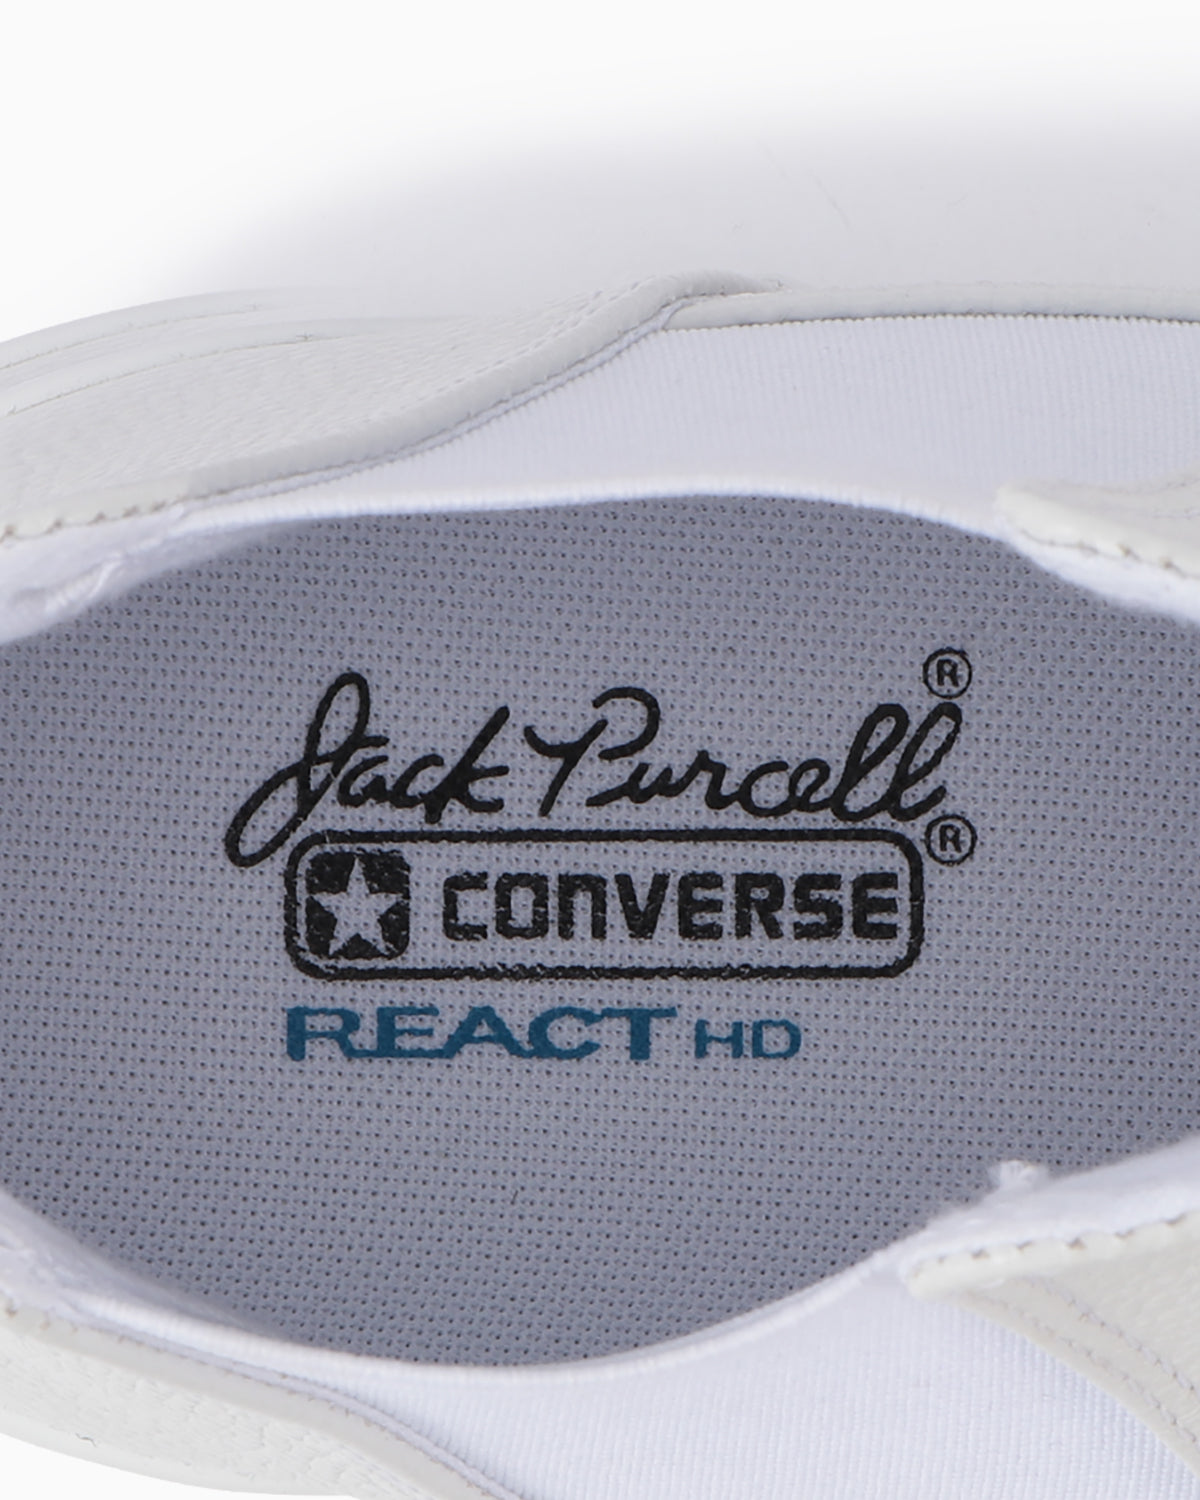 JACK PURCELL LEATHER SIDEGORE RH